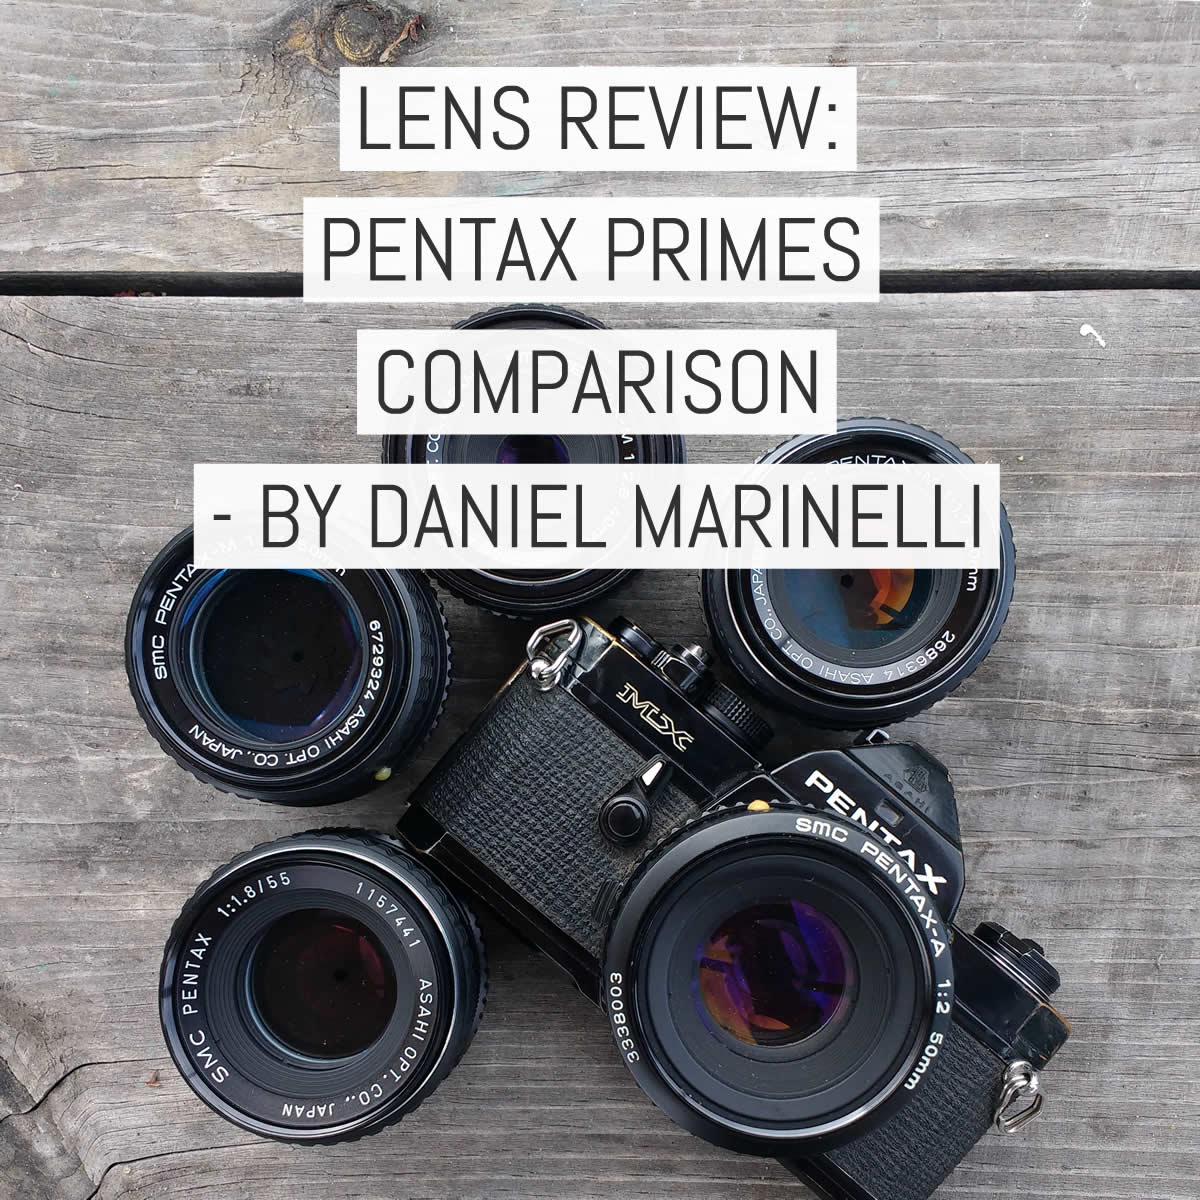 Lens review: Pentax prime comparison – five lenses head to head from 40mm to 55mm